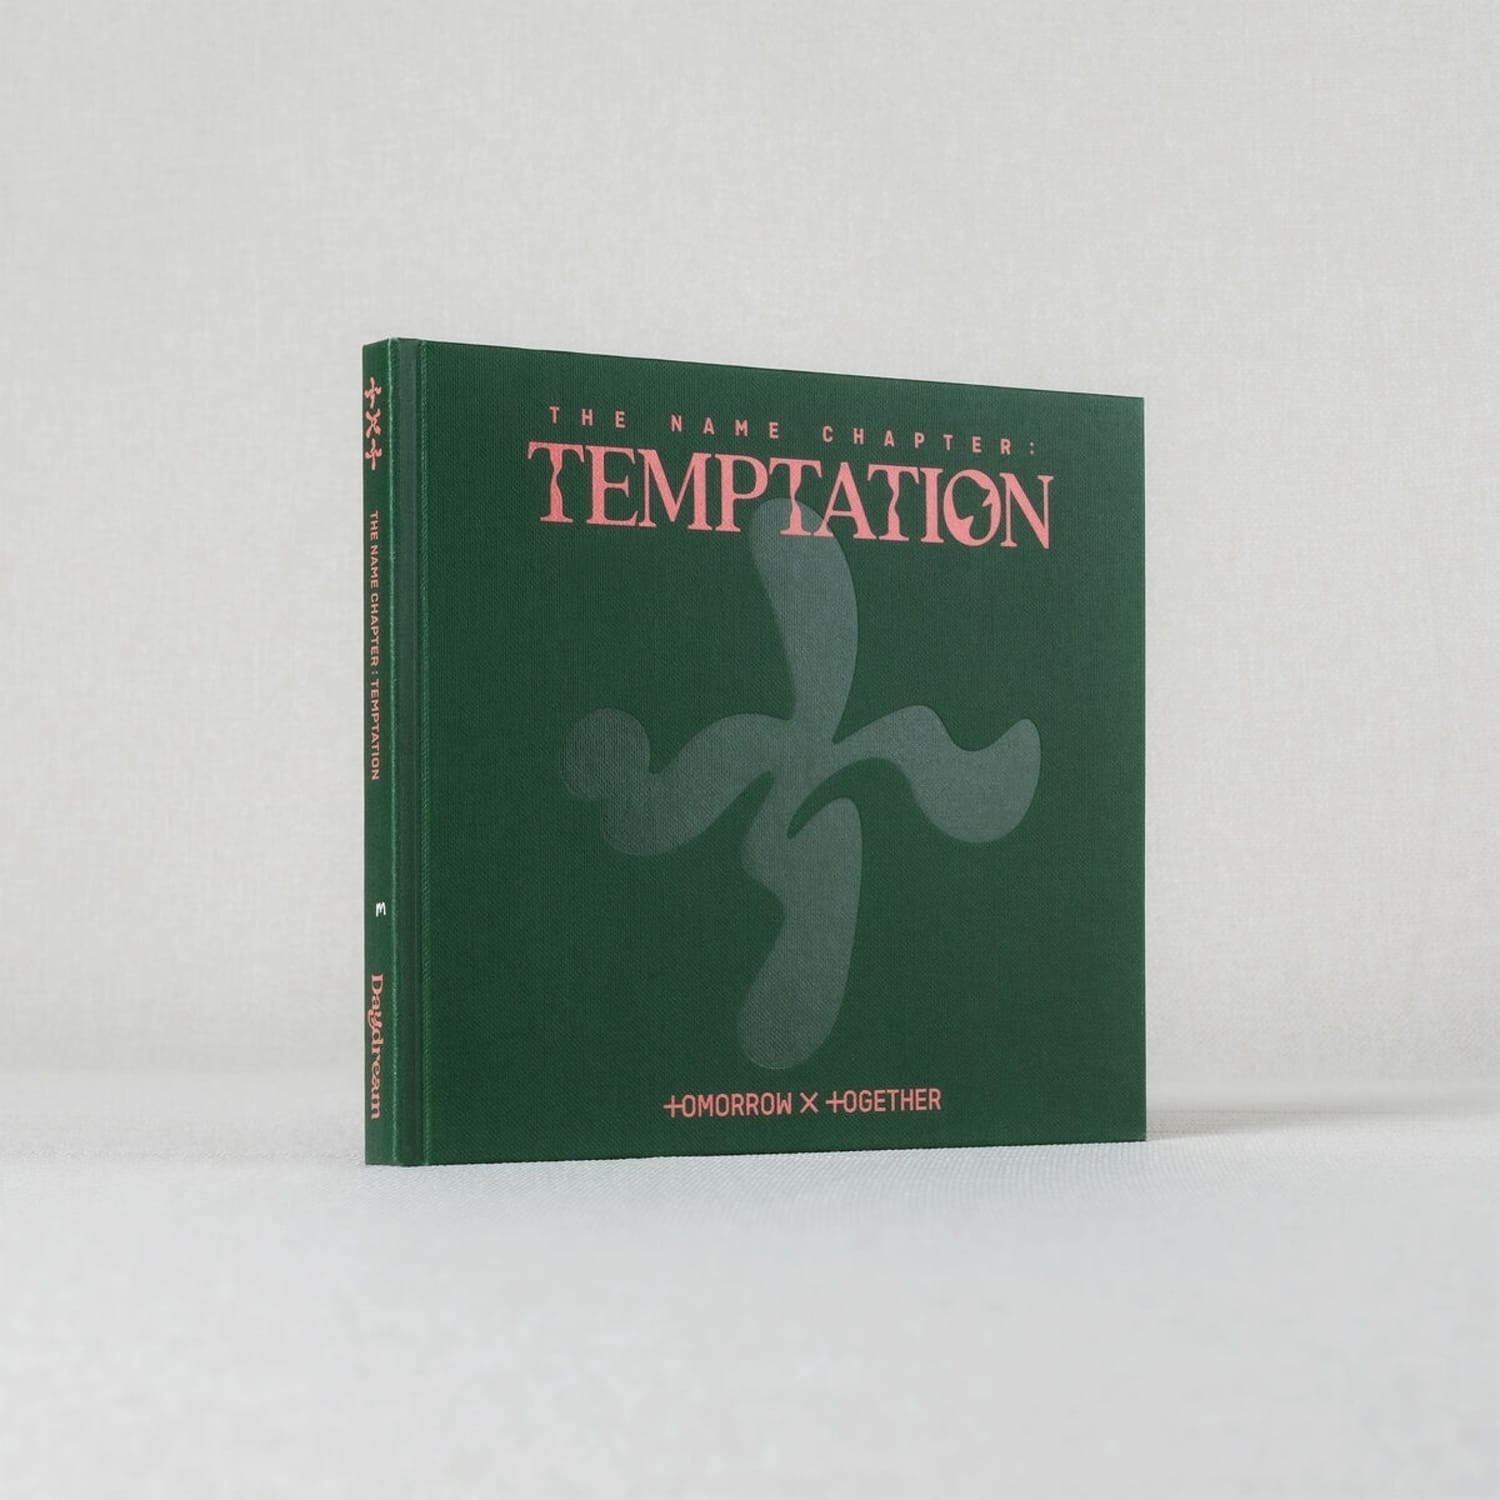 Tomorrow X Together - THE NAME CHAPTER: TEMPTATION 